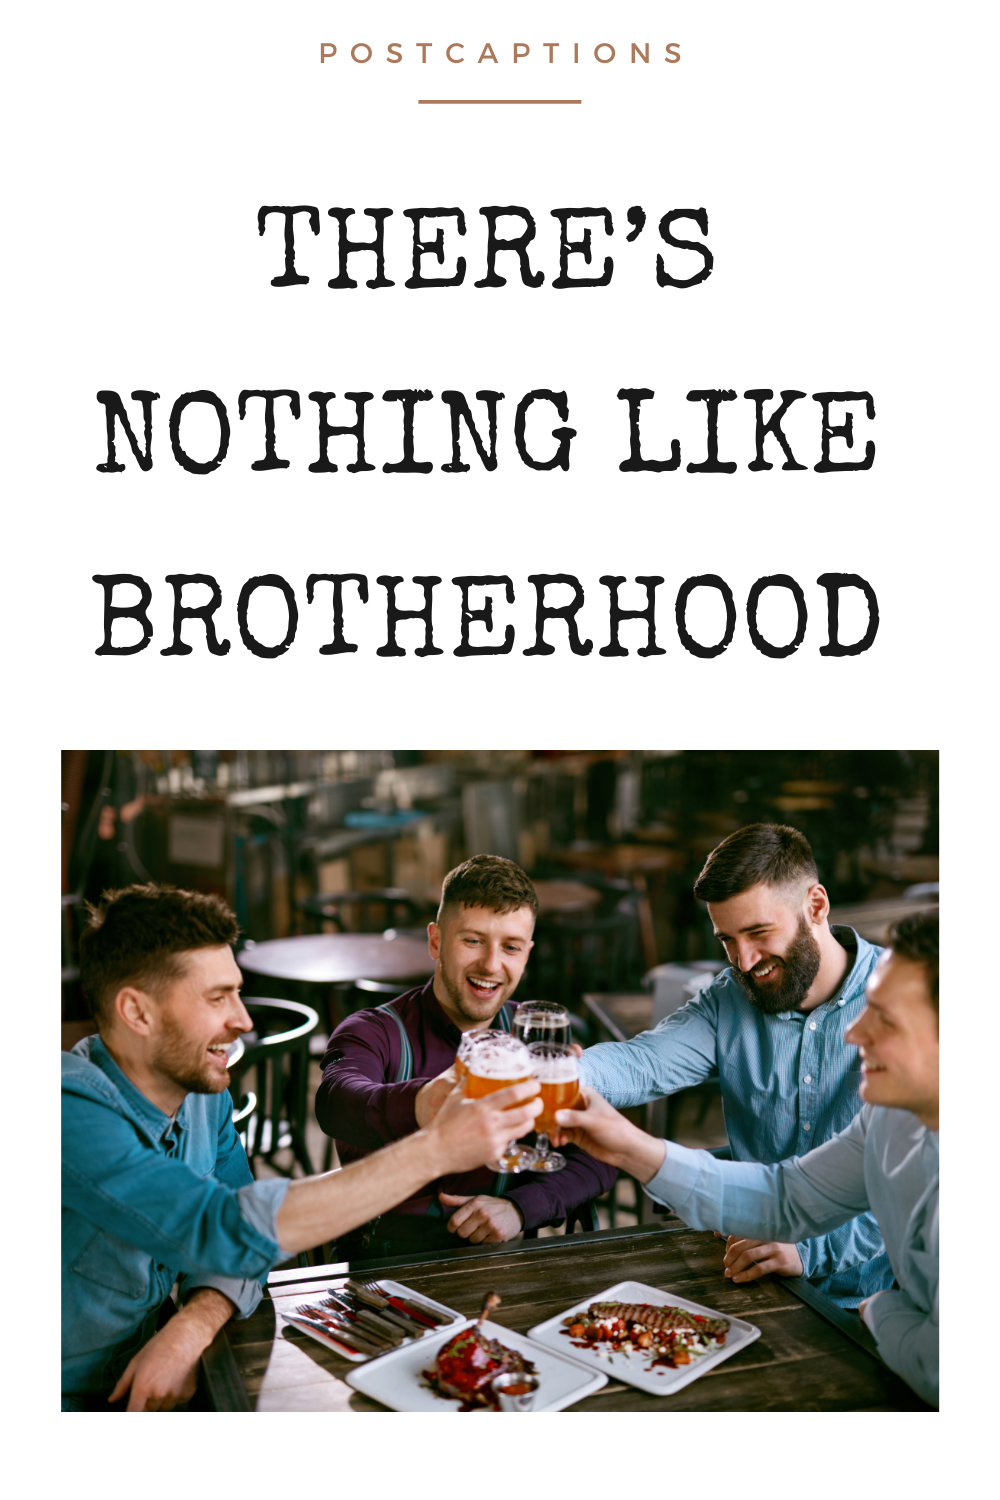 Captions about brotherhood